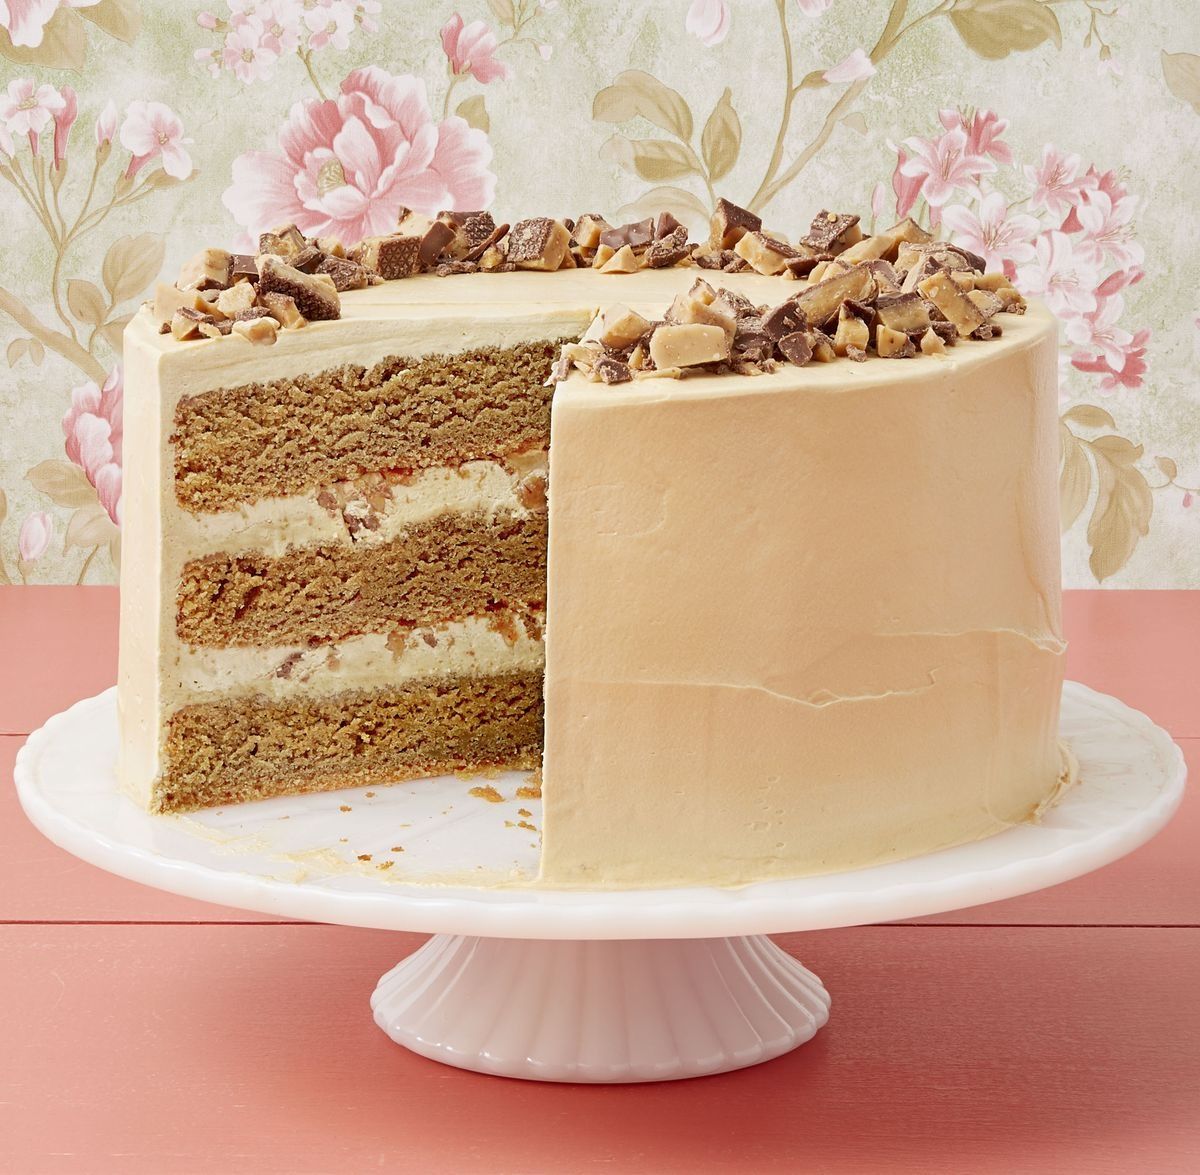 50 Vintage Inspired Lambeth Cakes That're So Trendy : New Year Cake